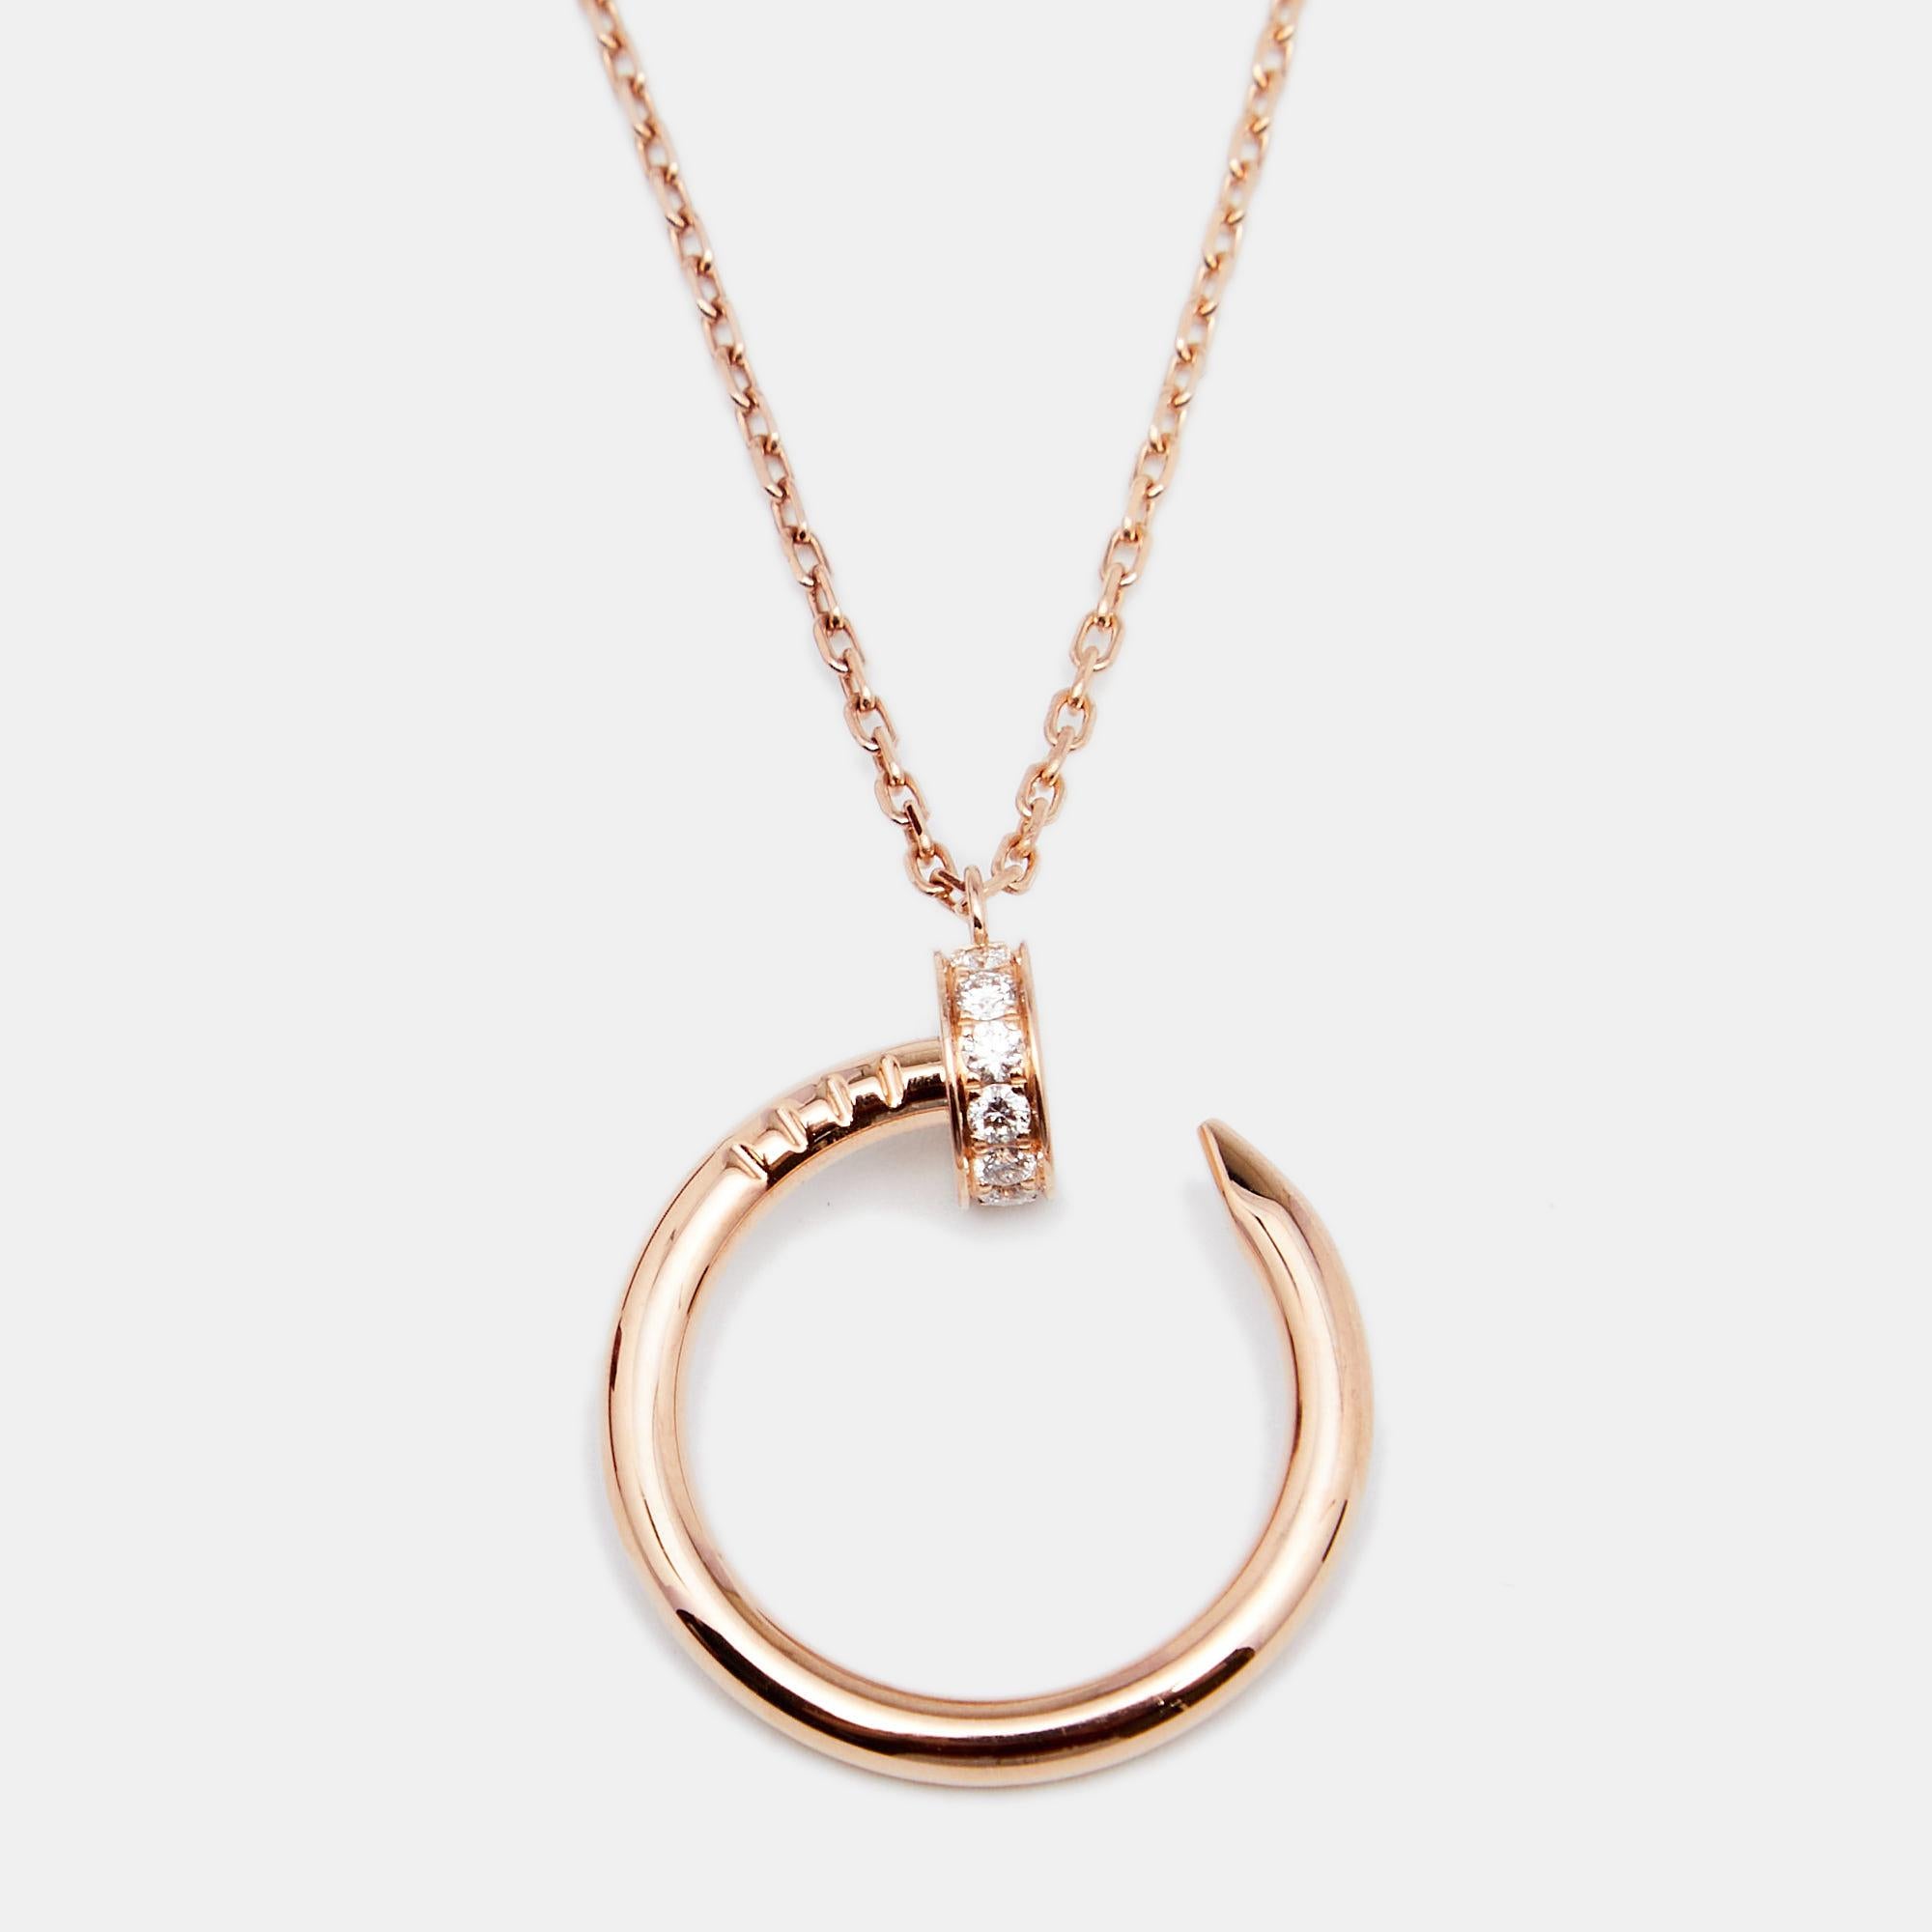 The Juste Un Clou collection from Cartier is all about making ordinary objects into exquisite pieces of jewelry, and it would be fair to say that this piece is truly beyond precious. It is a creation that proudly represents the expertise and talent